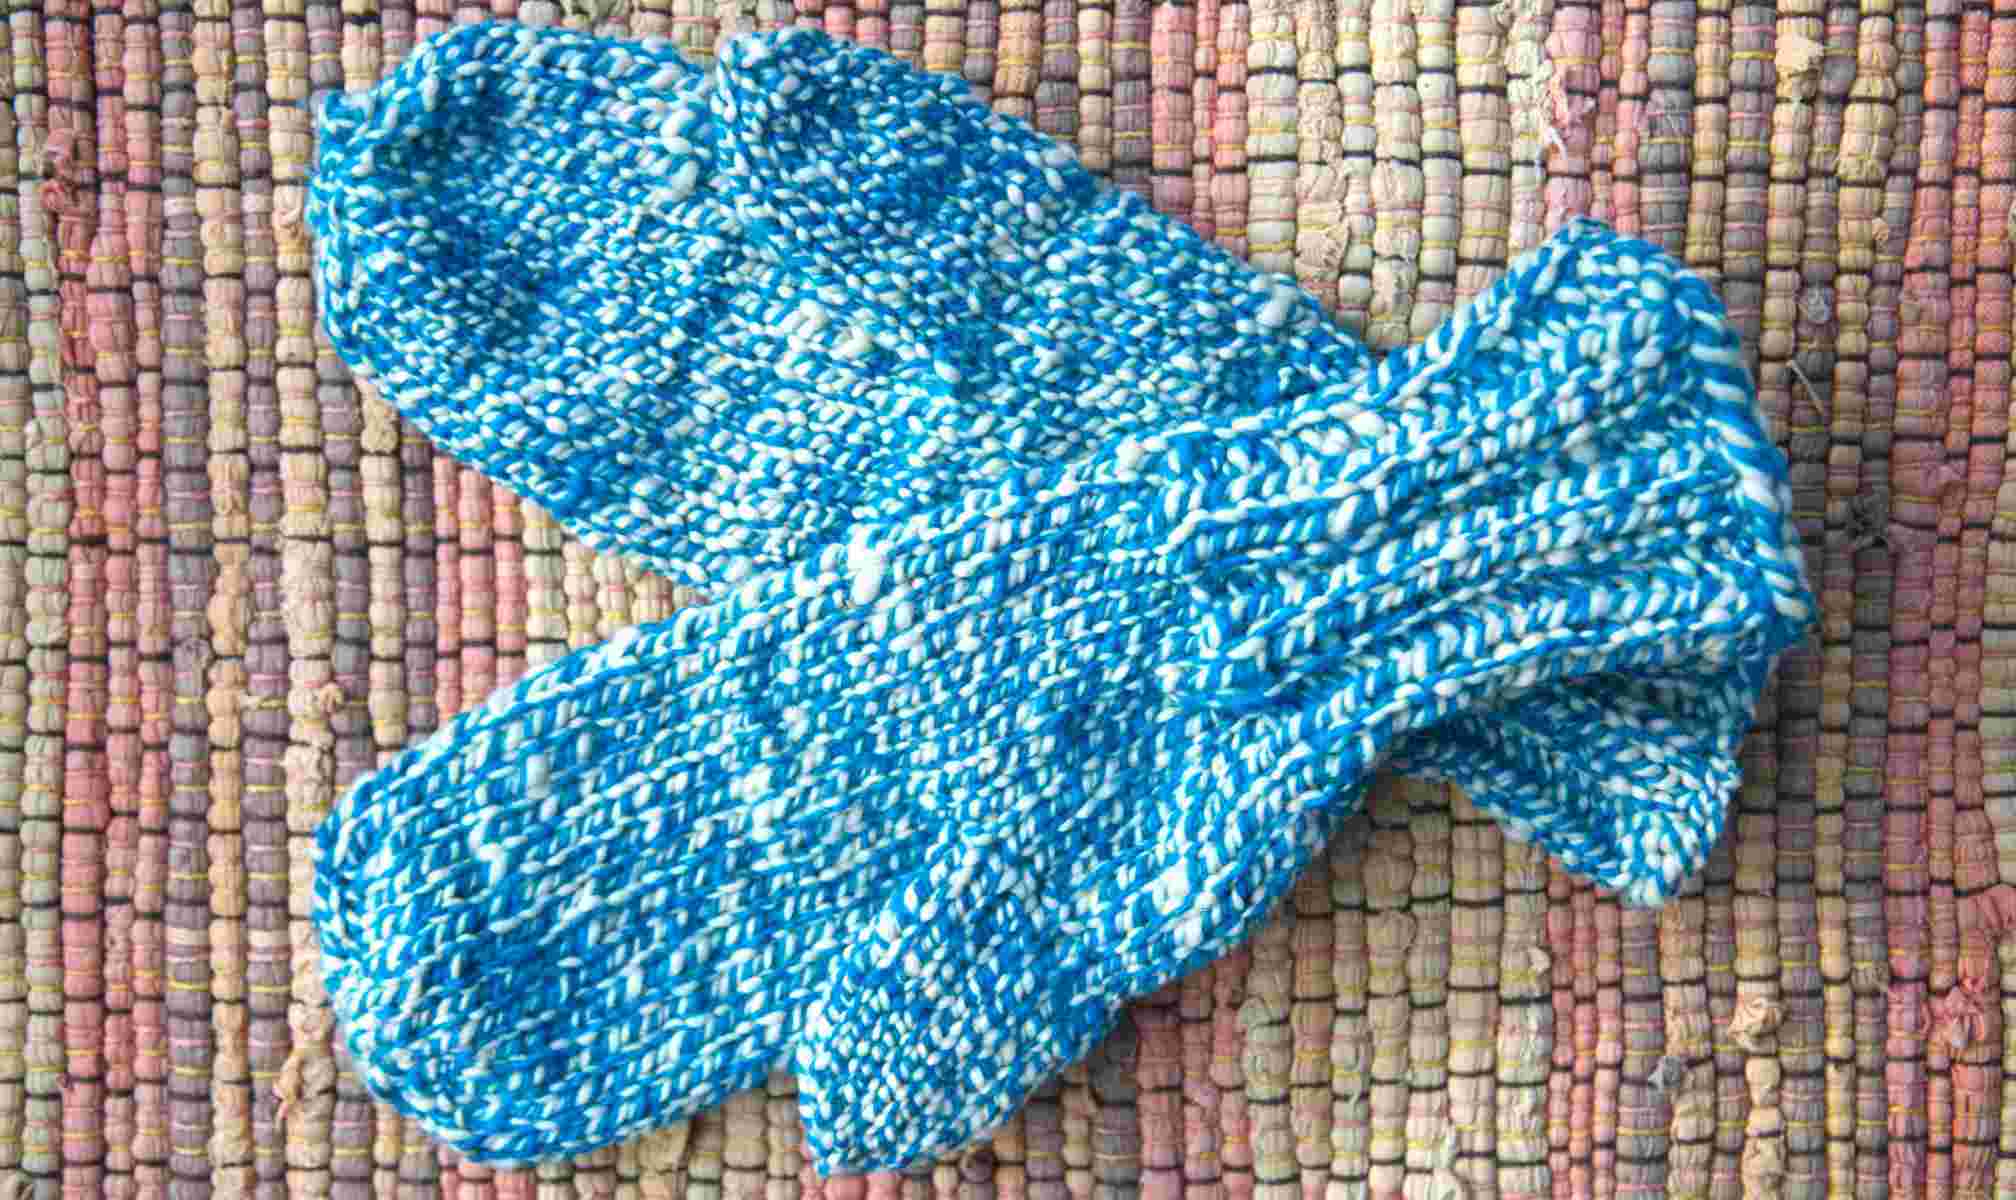 White-and-Blue Romney Wool Rugged Mittens